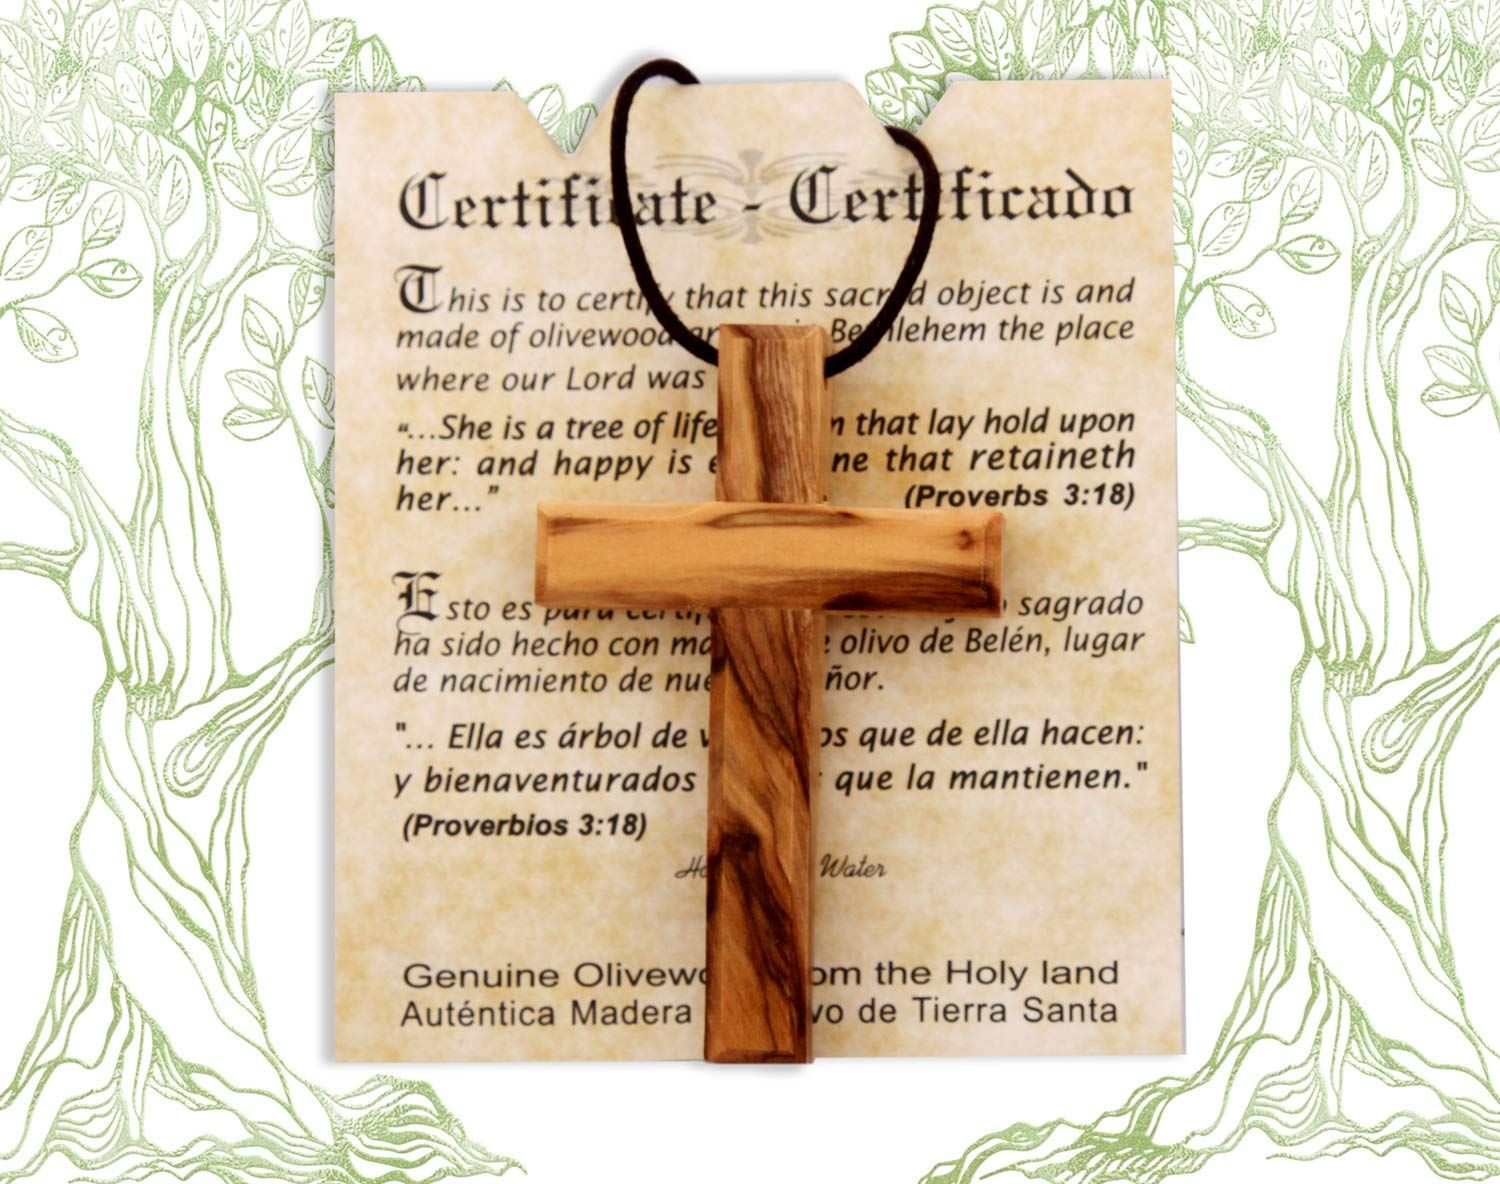  Wooden Cross. Plain Holy Land cross, Olive Wood by Wood Cross :  Home & Kitchen